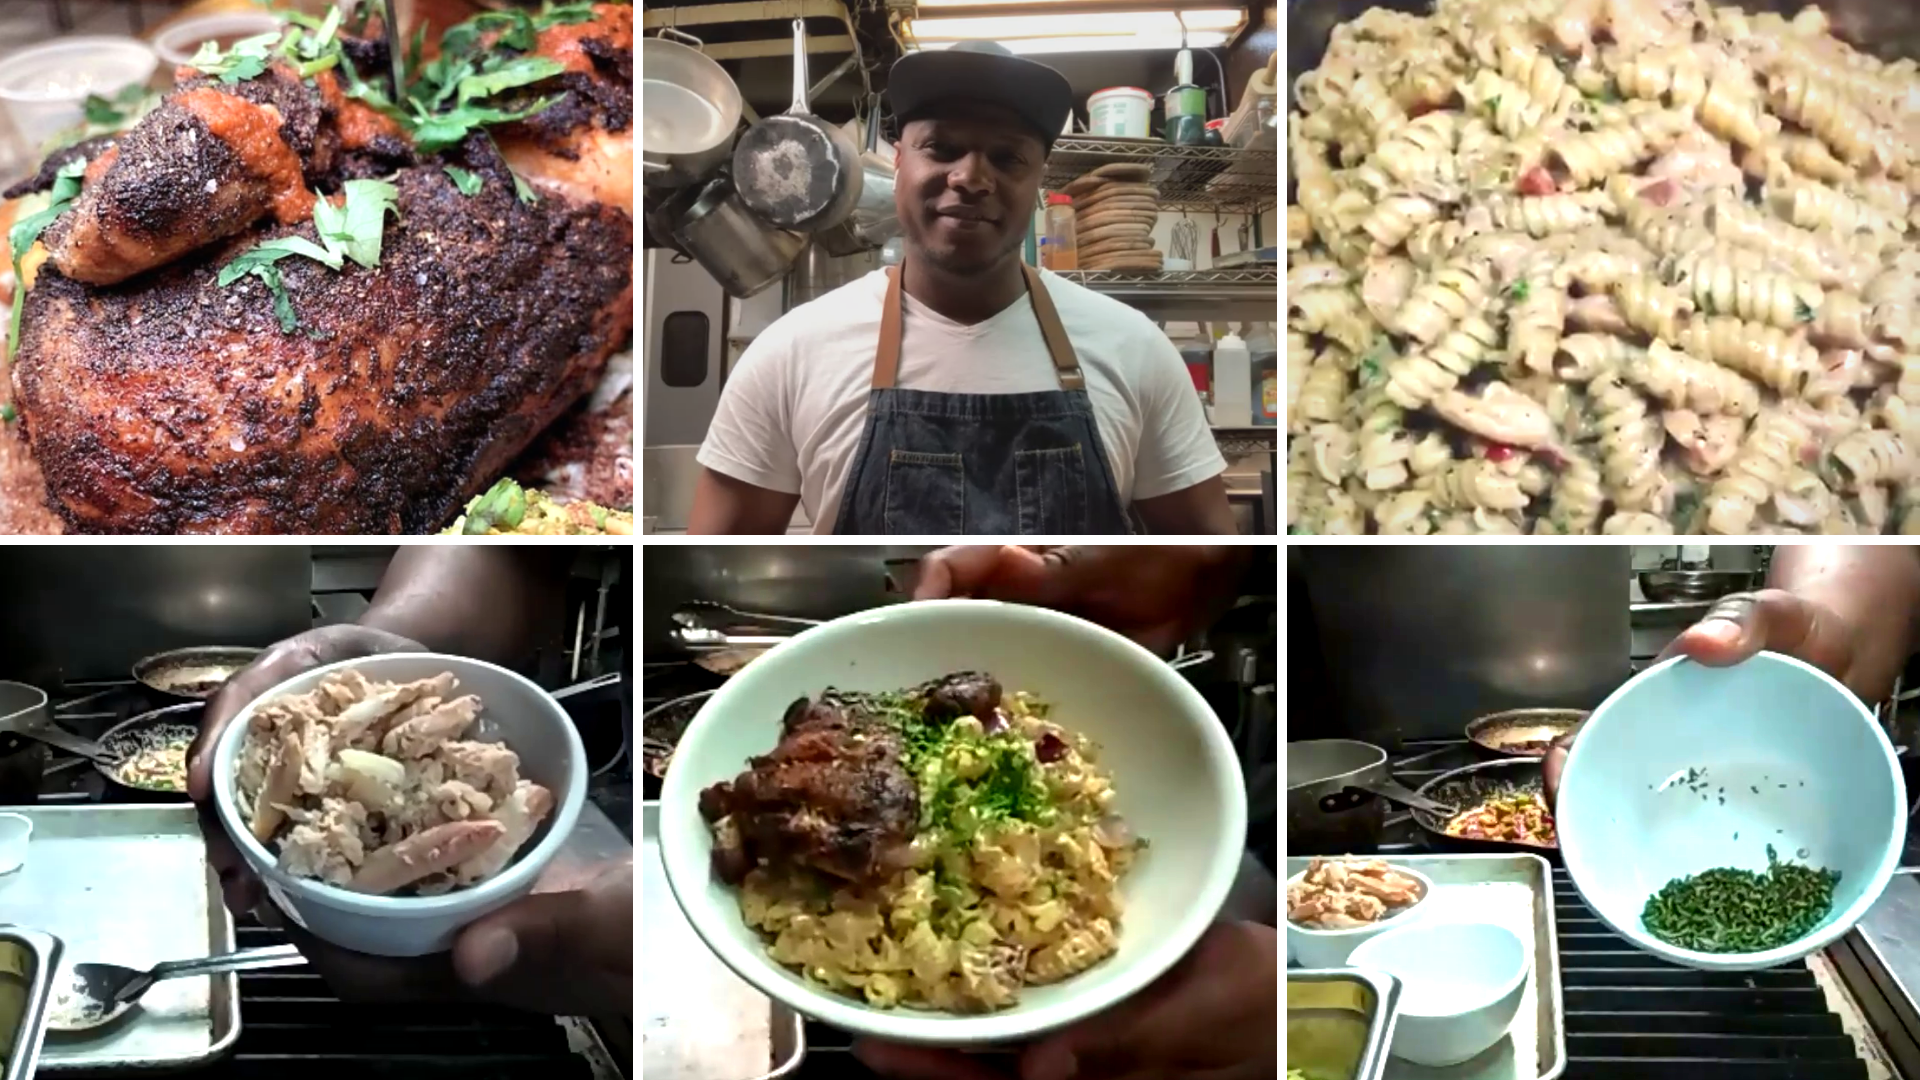 Chef Trey Lamont gives us a master class in Jerk and critical instruction of how to make a great roux! Belltown's Jerk Shack is open for takeout & delivery.